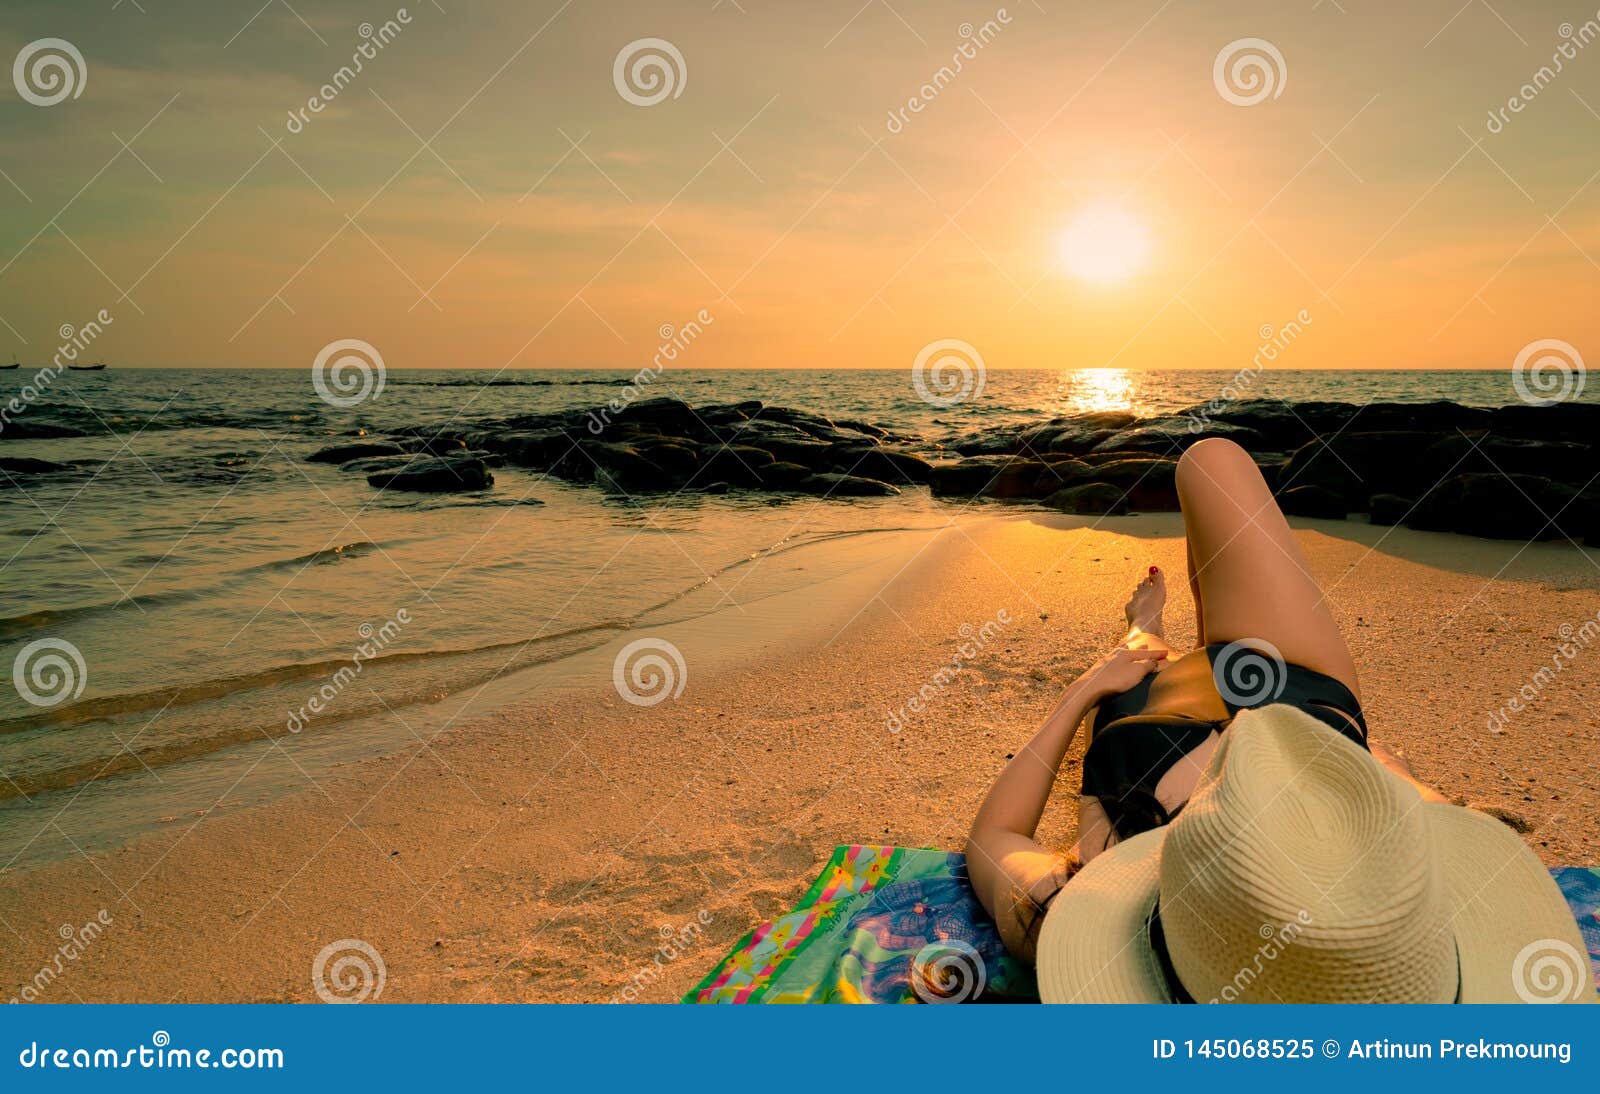 Woman Lying Down On Sand Beach At Sunrise Woman With Straw Hat Sunbathing On Tropical Paradise